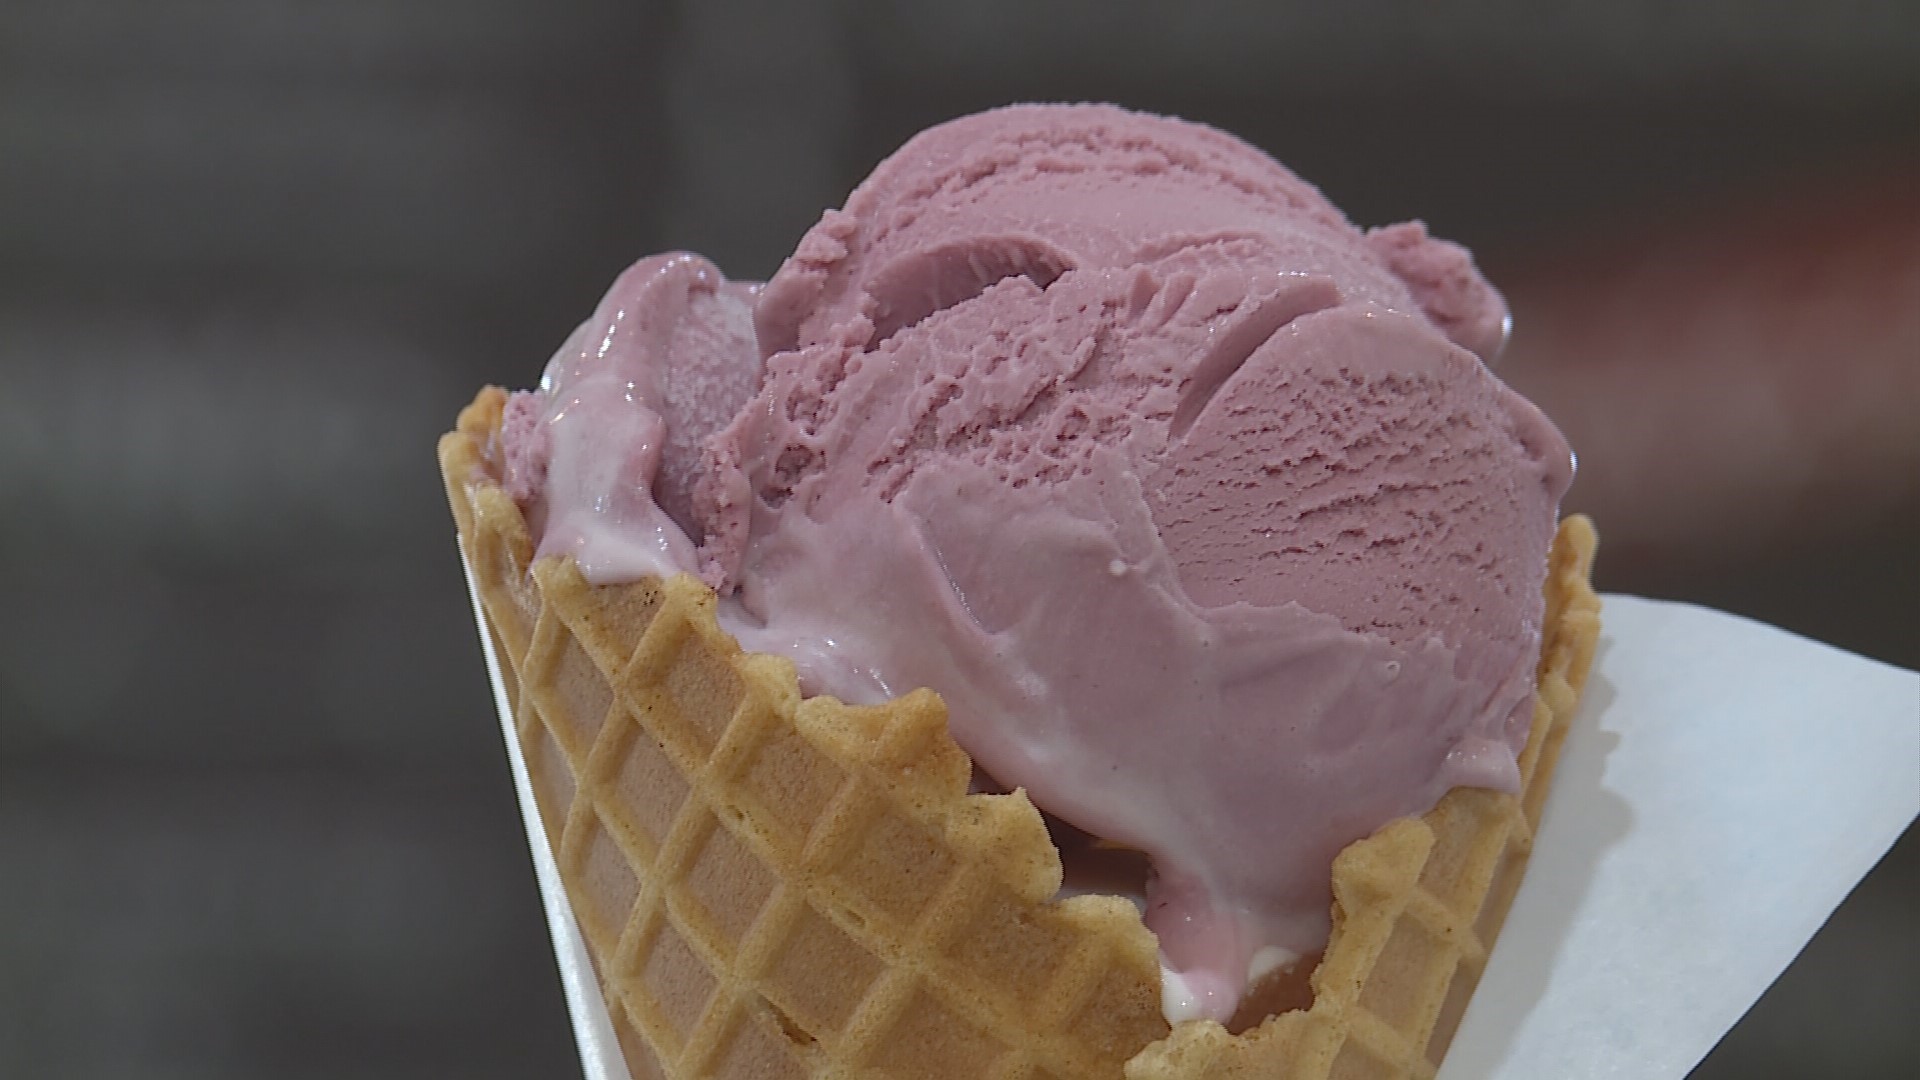 Snoqualmie Ice Cream was voted Best Ice Cream in 2019's Best of Western Washington viewers choice poll.